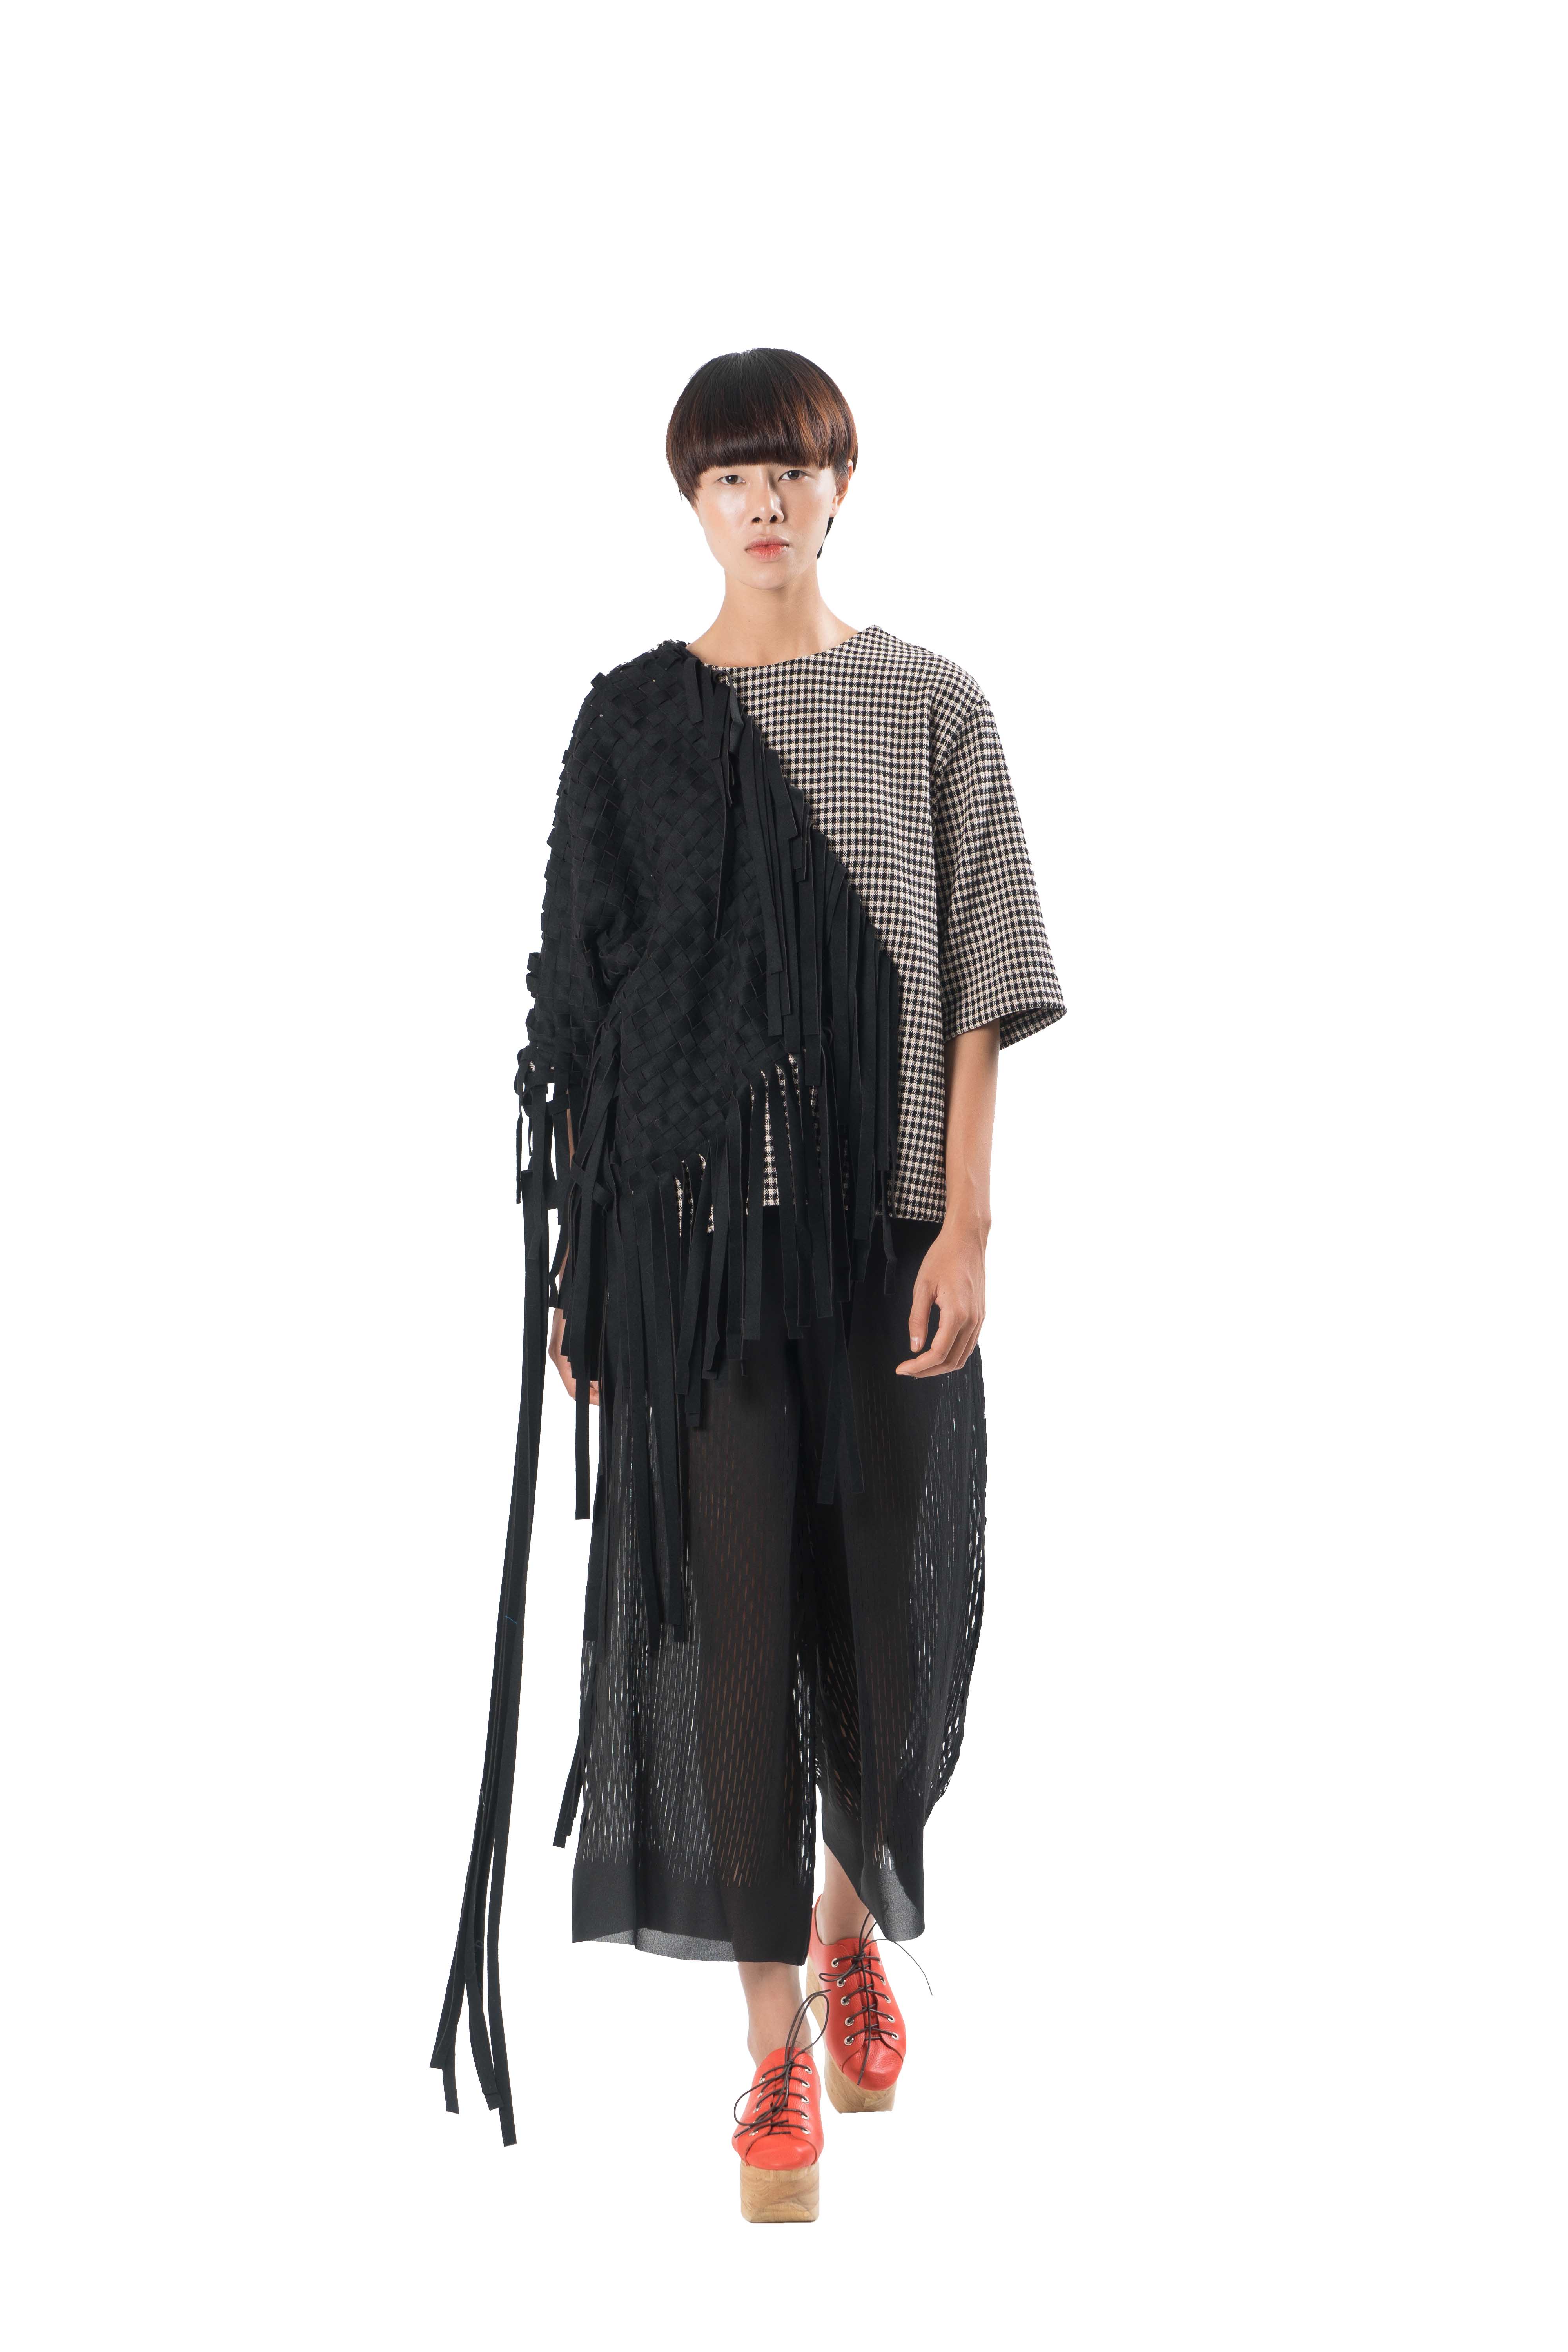 Two tones contrasting boxy loose fitting top with hand woven details